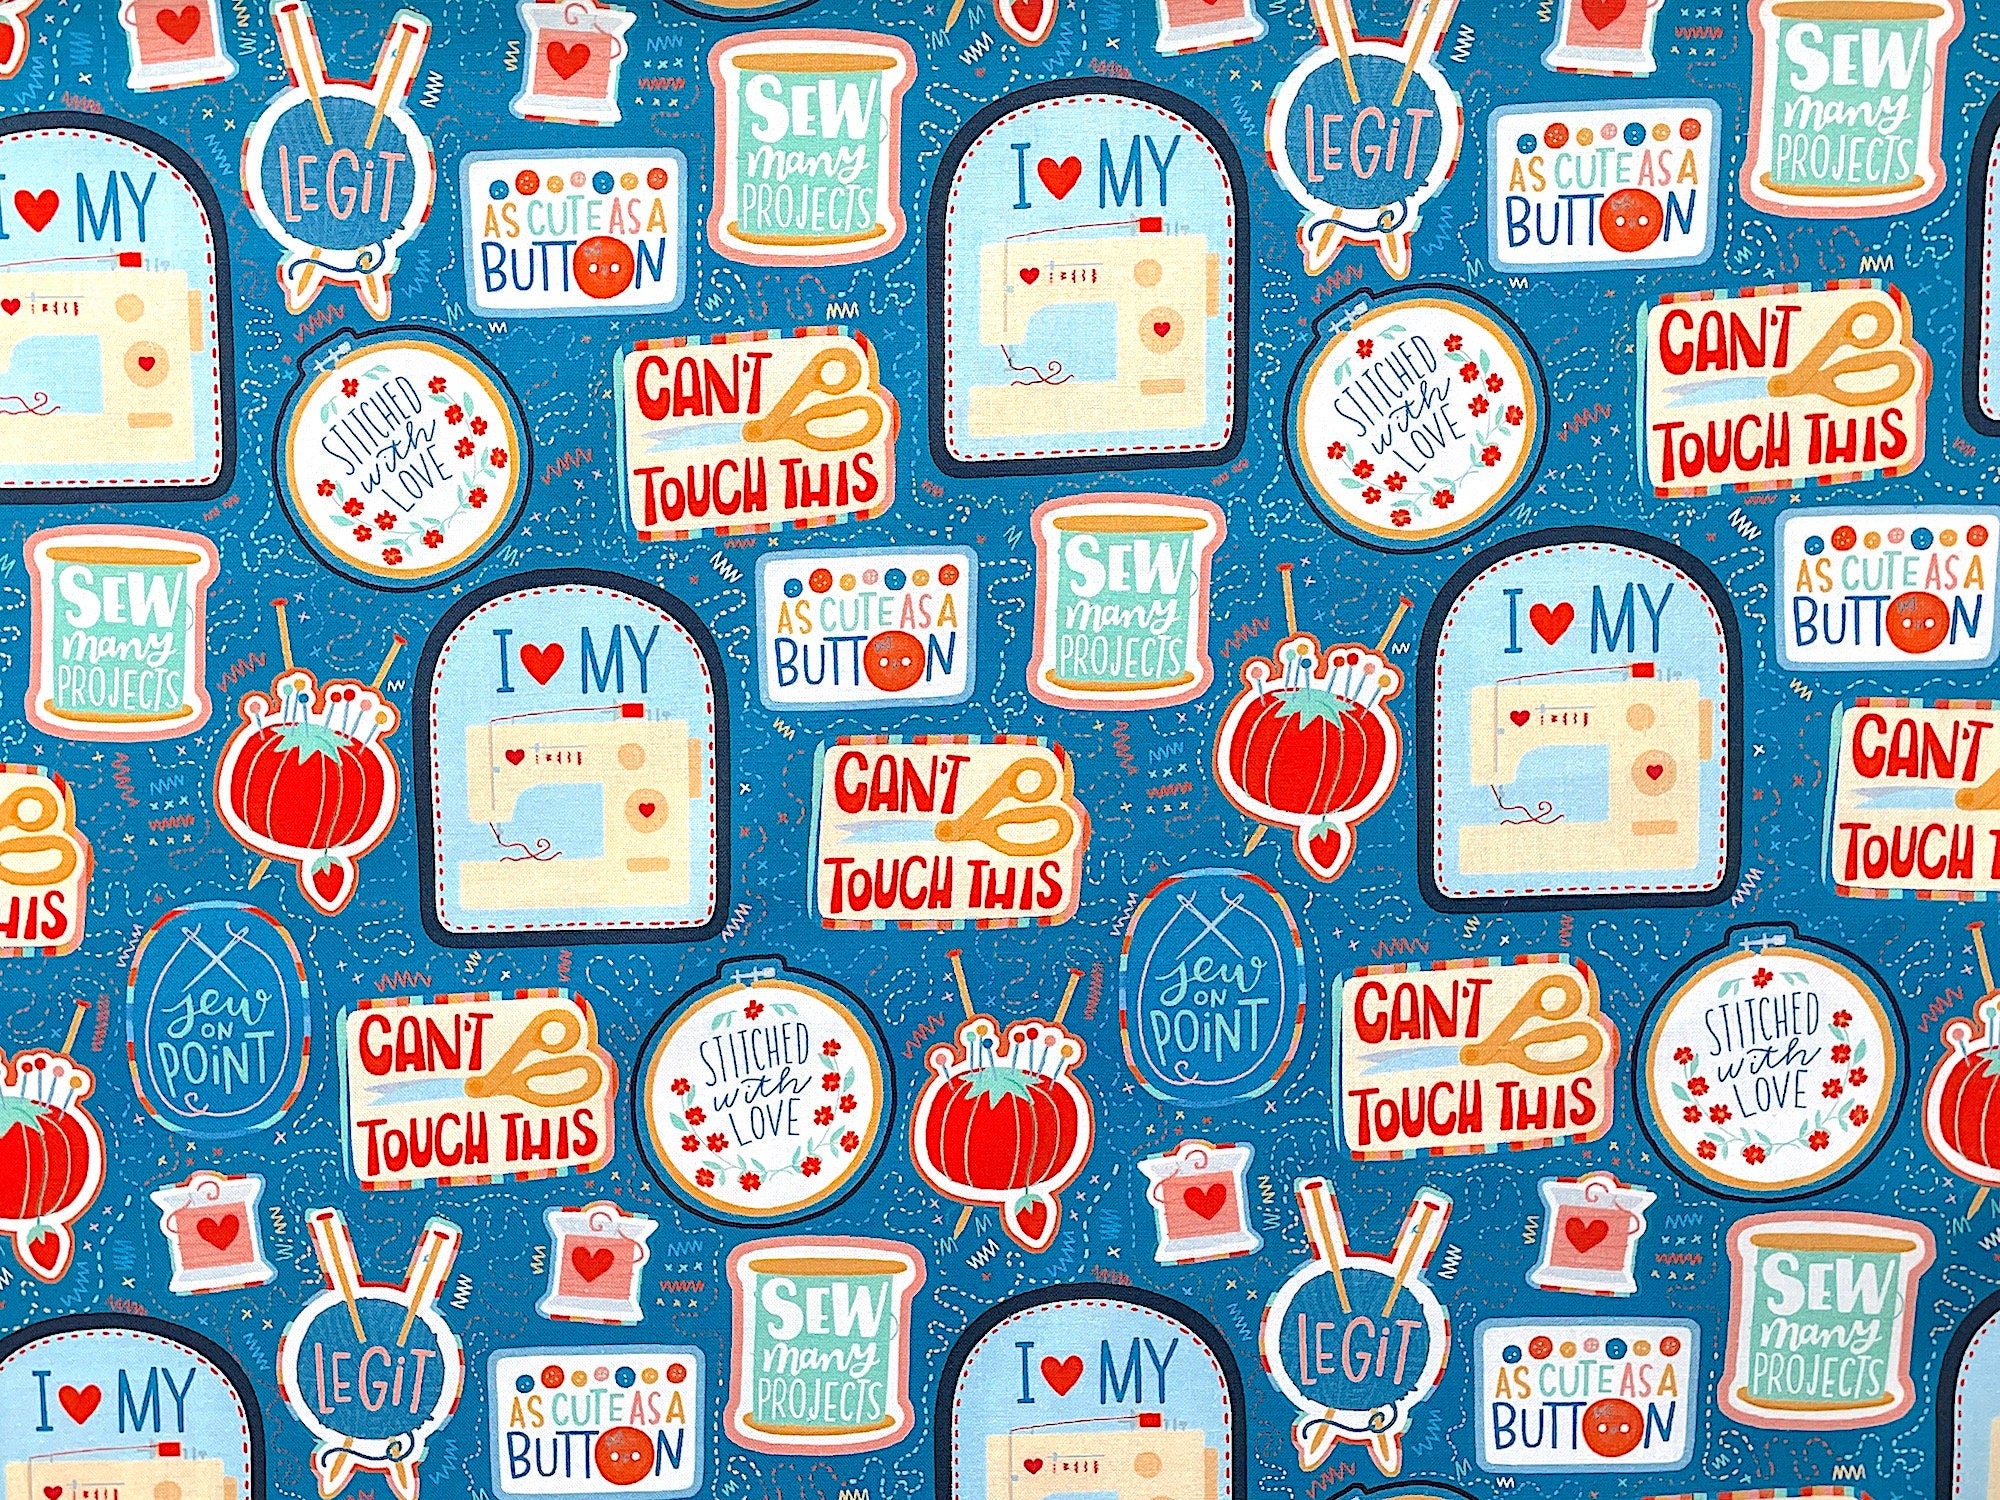 This sewing themed fabric is covered with patches. Within the patches you will find sewing machines, buttons, thread, pin cushions and other sewing items. This fabric also has sayings such as cute as a button, sew many projects, legit, stitched with love and more. this fabric is part of the Stitched with Love collection.